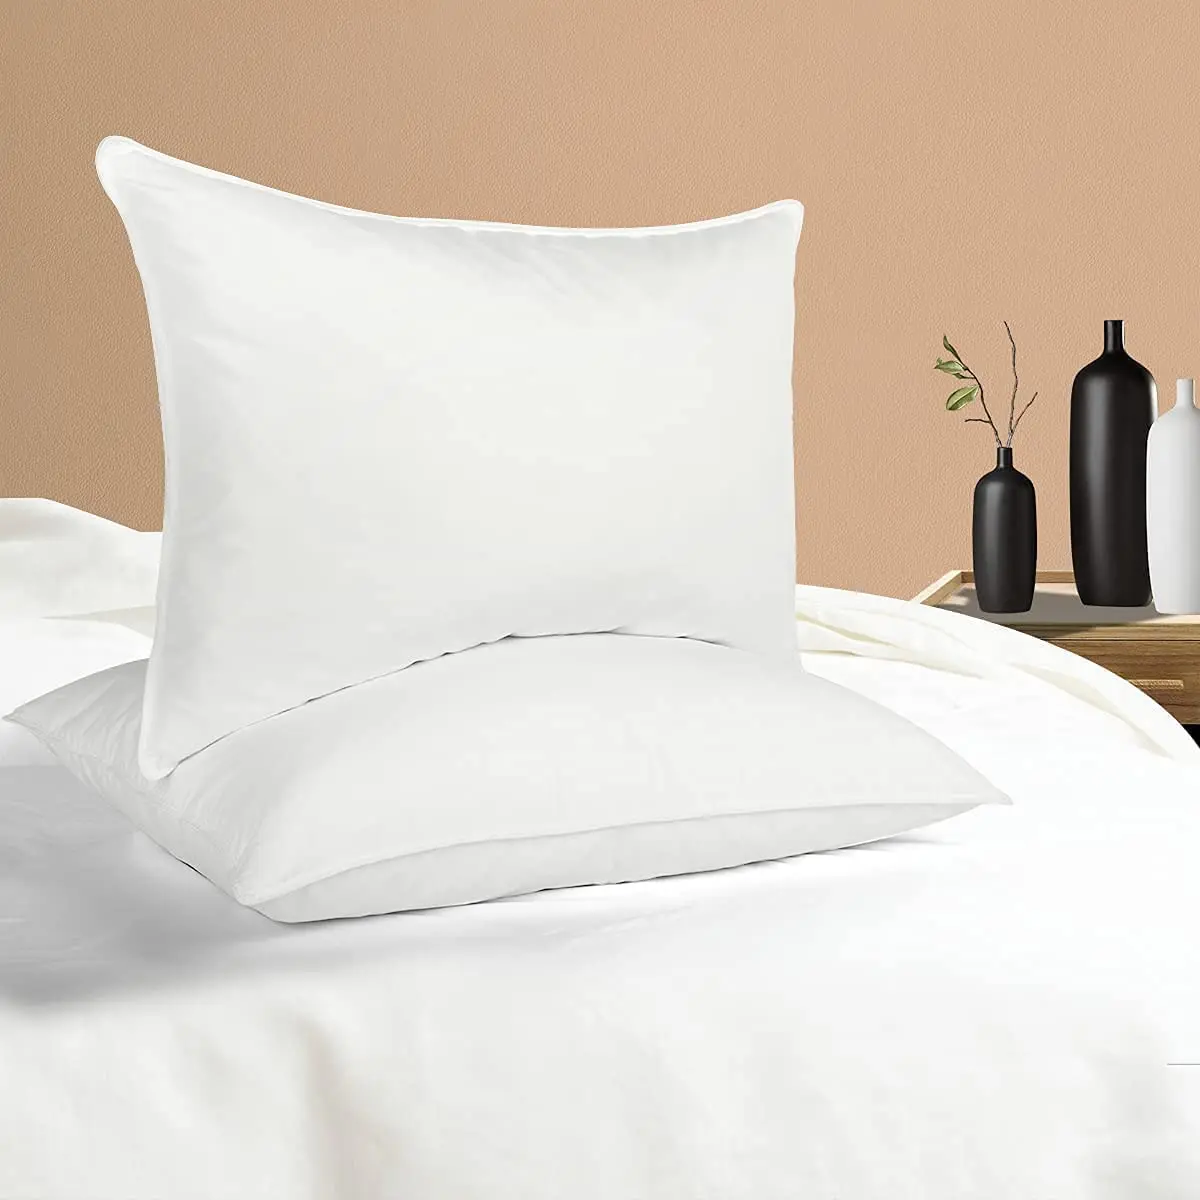 100% Cotton Fabric White Pillows Premium White Goose Feather And Down  Filled Pillow Hotel And Home Bed Pillow Insert. - Buy Goose Feather Down  Pillows,Hotel And Home Bed Pillow,100% Cotton Fabric White